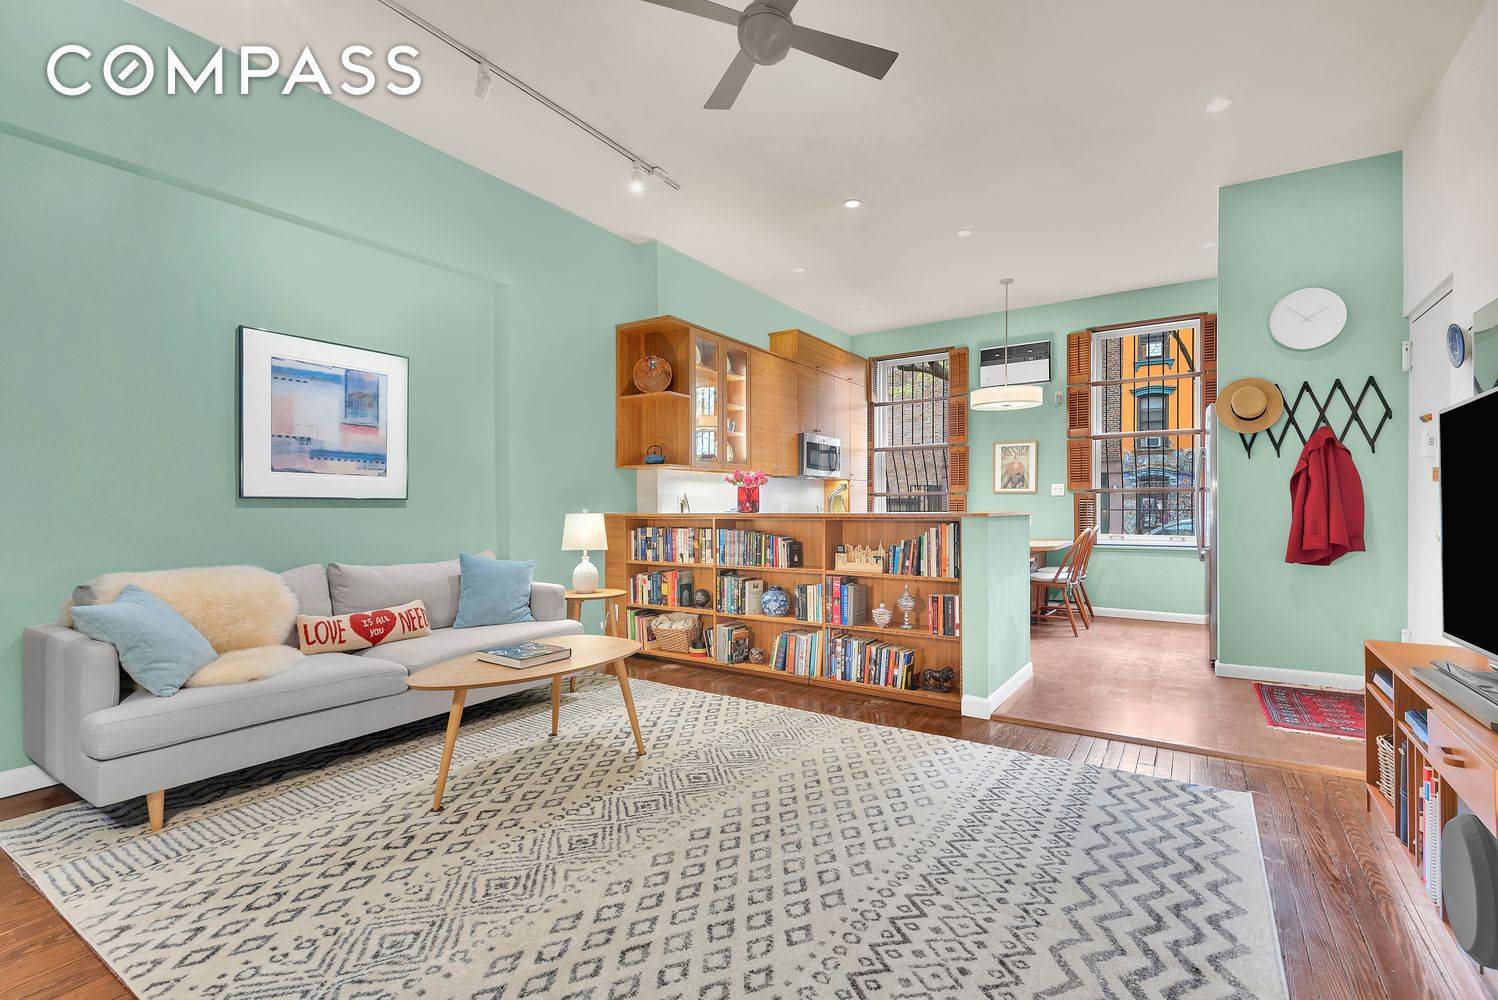 A Garden Oasis Imagine living in a home with a bright, airy kitchen and a large spectacular garden right in the heart of one of Brooklyn's most desirable locations.